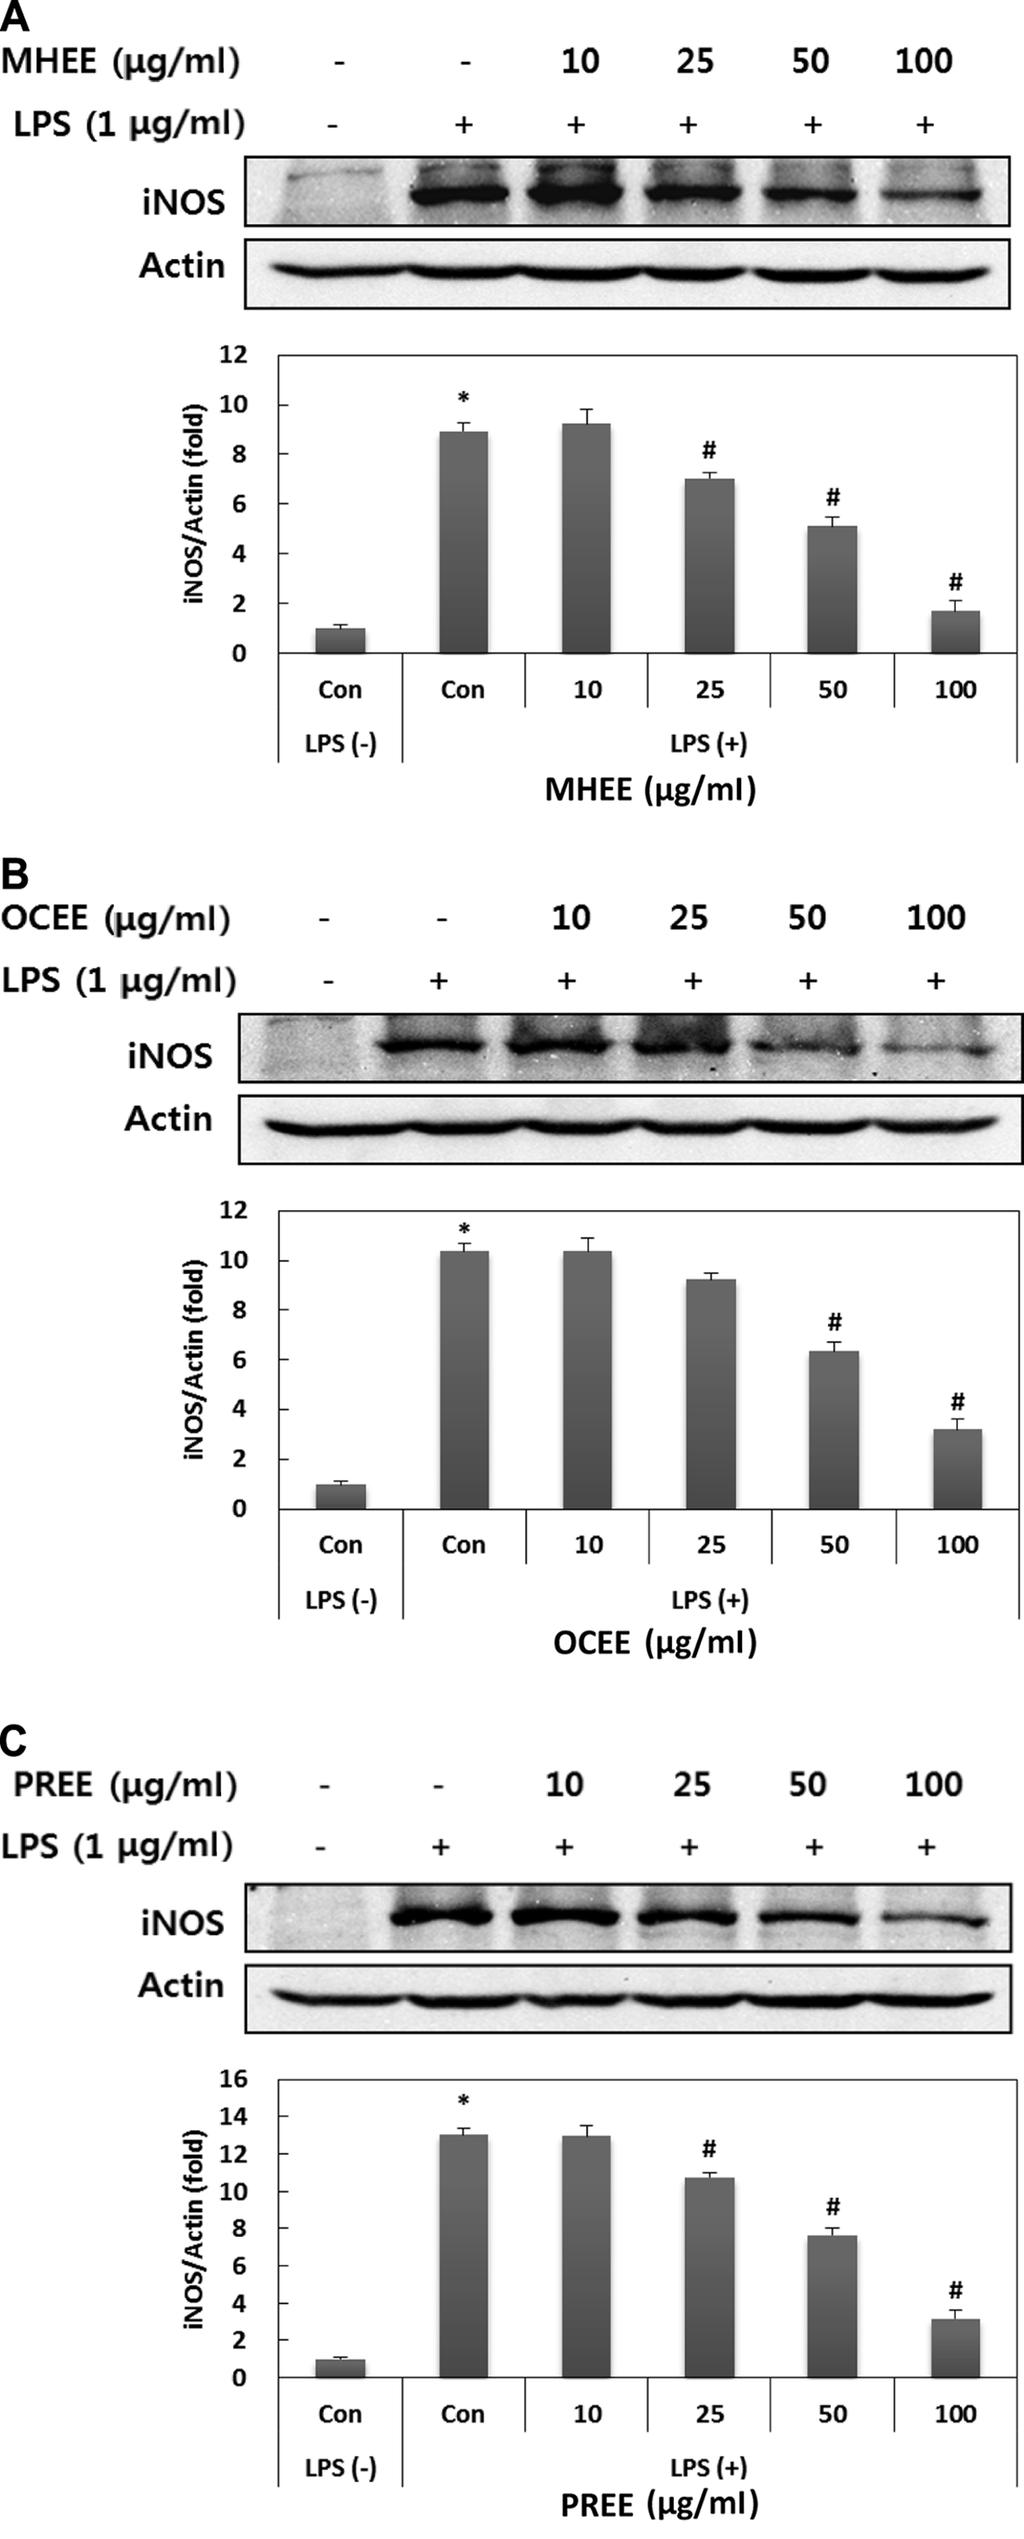 Biological Activities of Three Chinese Plants 281 Fig. 6. Modulation of LPS-induced inos protein expression in RAW 264.7 cells by MHEE (A), OCEE (B), and PREE (C).